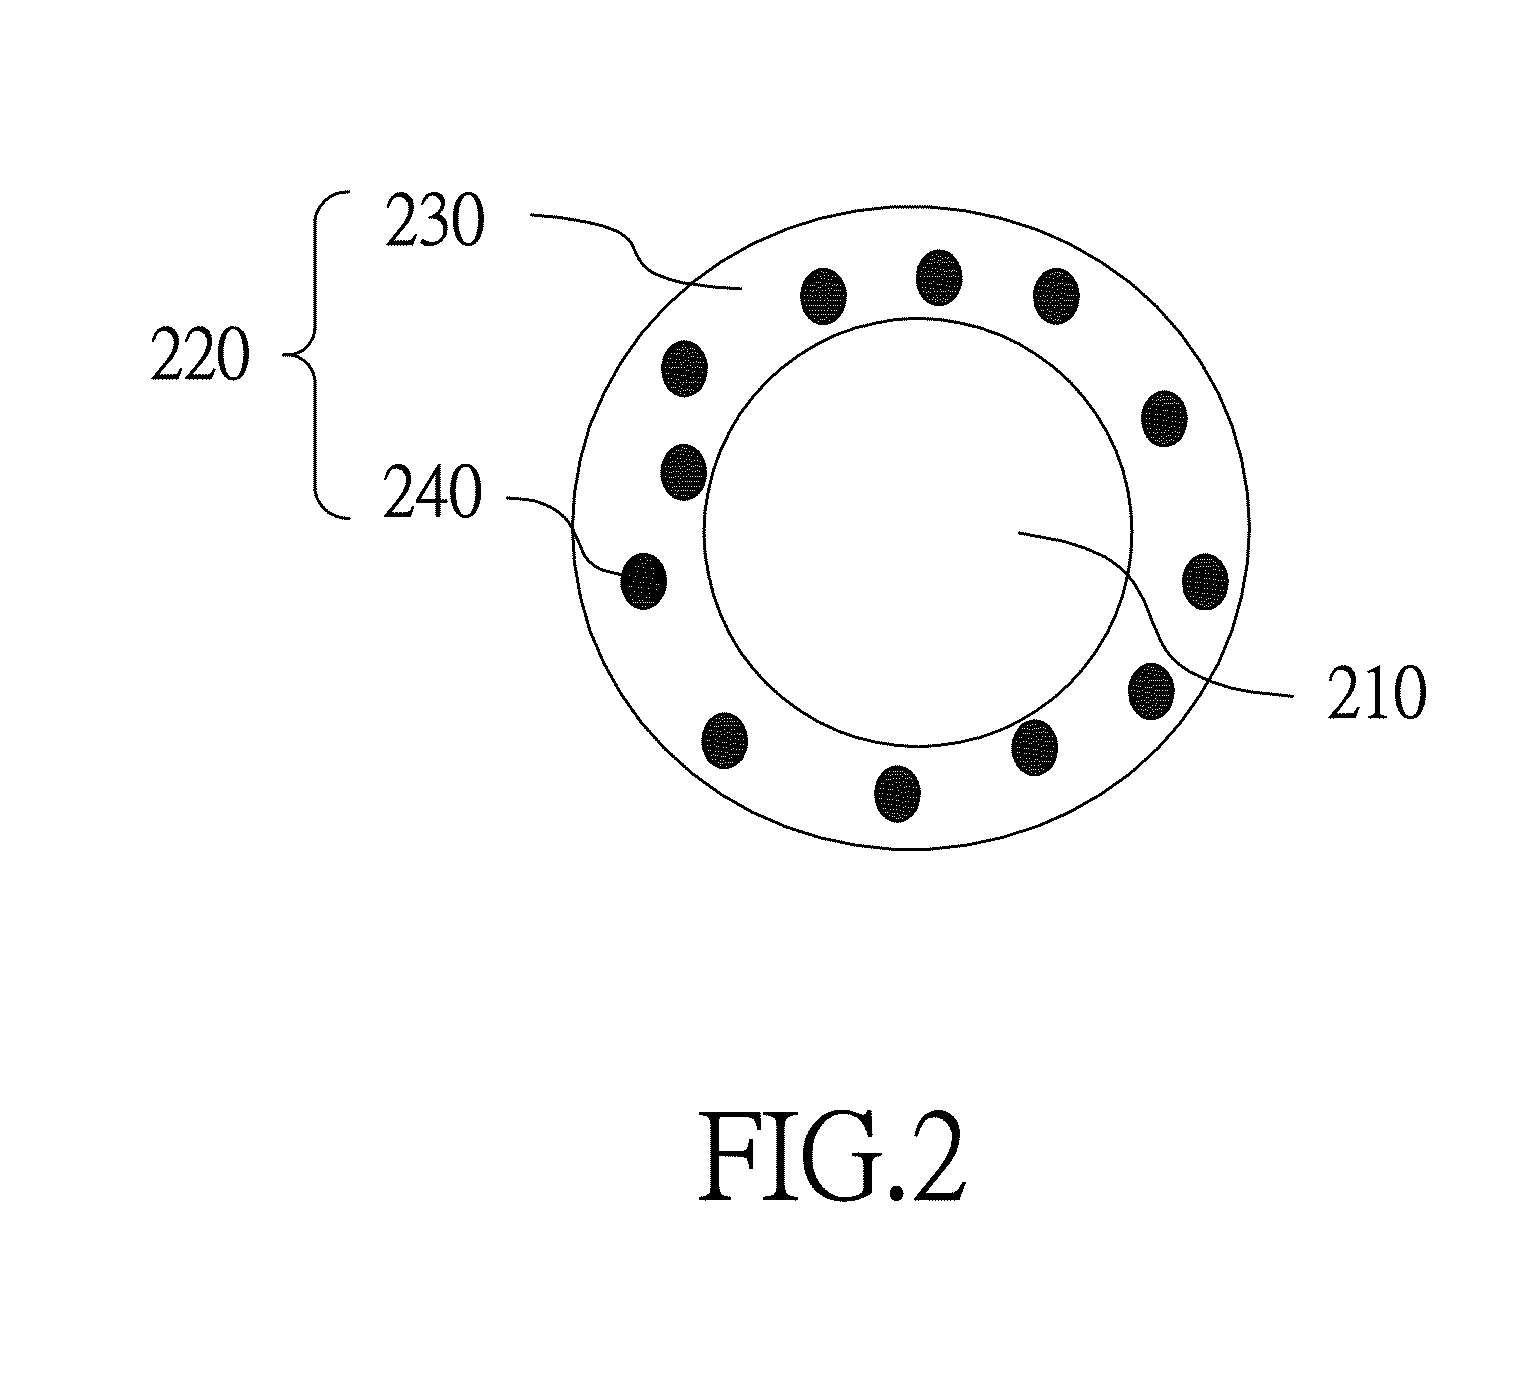 Process for preparing phase change microcapsule having thermally conductive shell